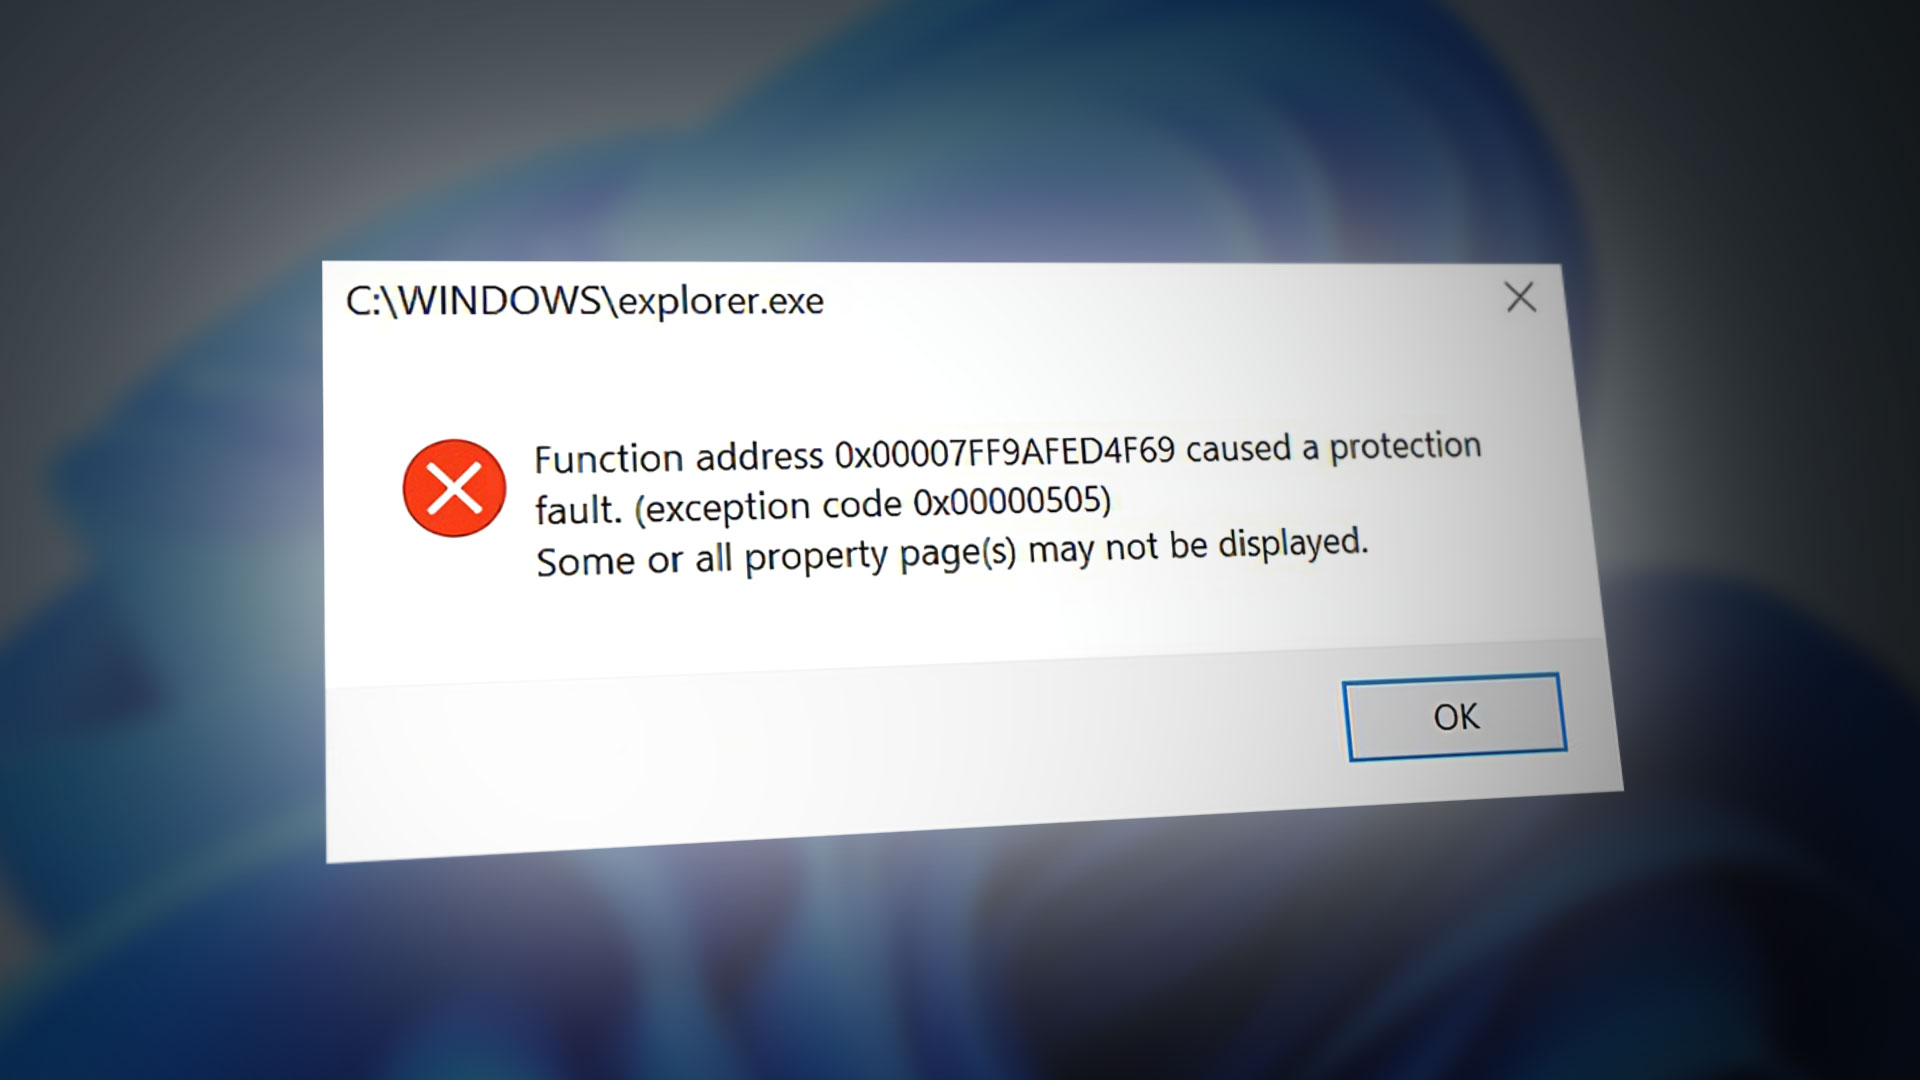 4 Methods to Fix 'Function address caused a protection fault' Error